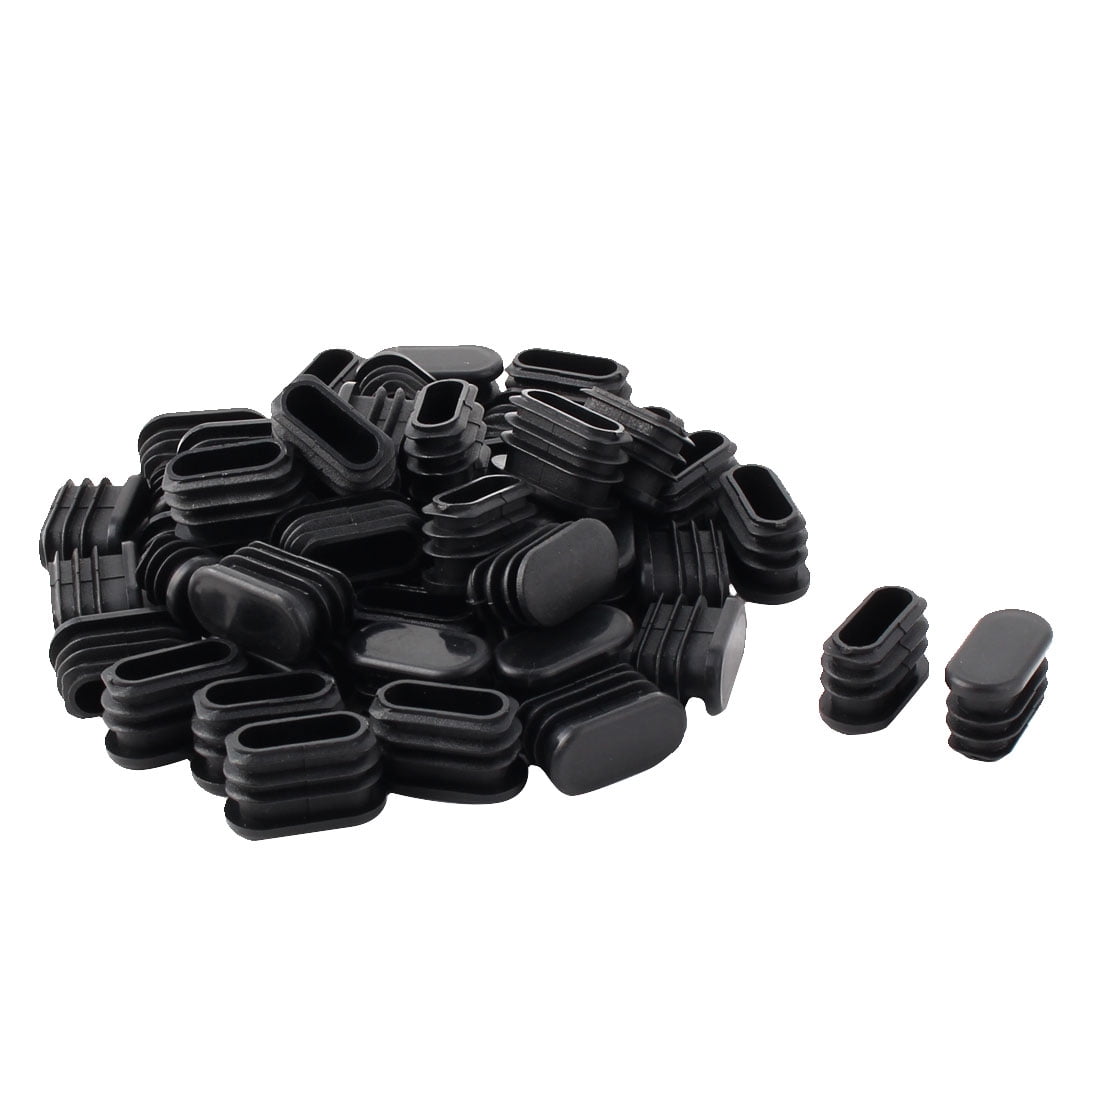 uxcell 15mm x 30mm Plastic Oval Shaped End Cup Tube Insert Black 12 Pcs 